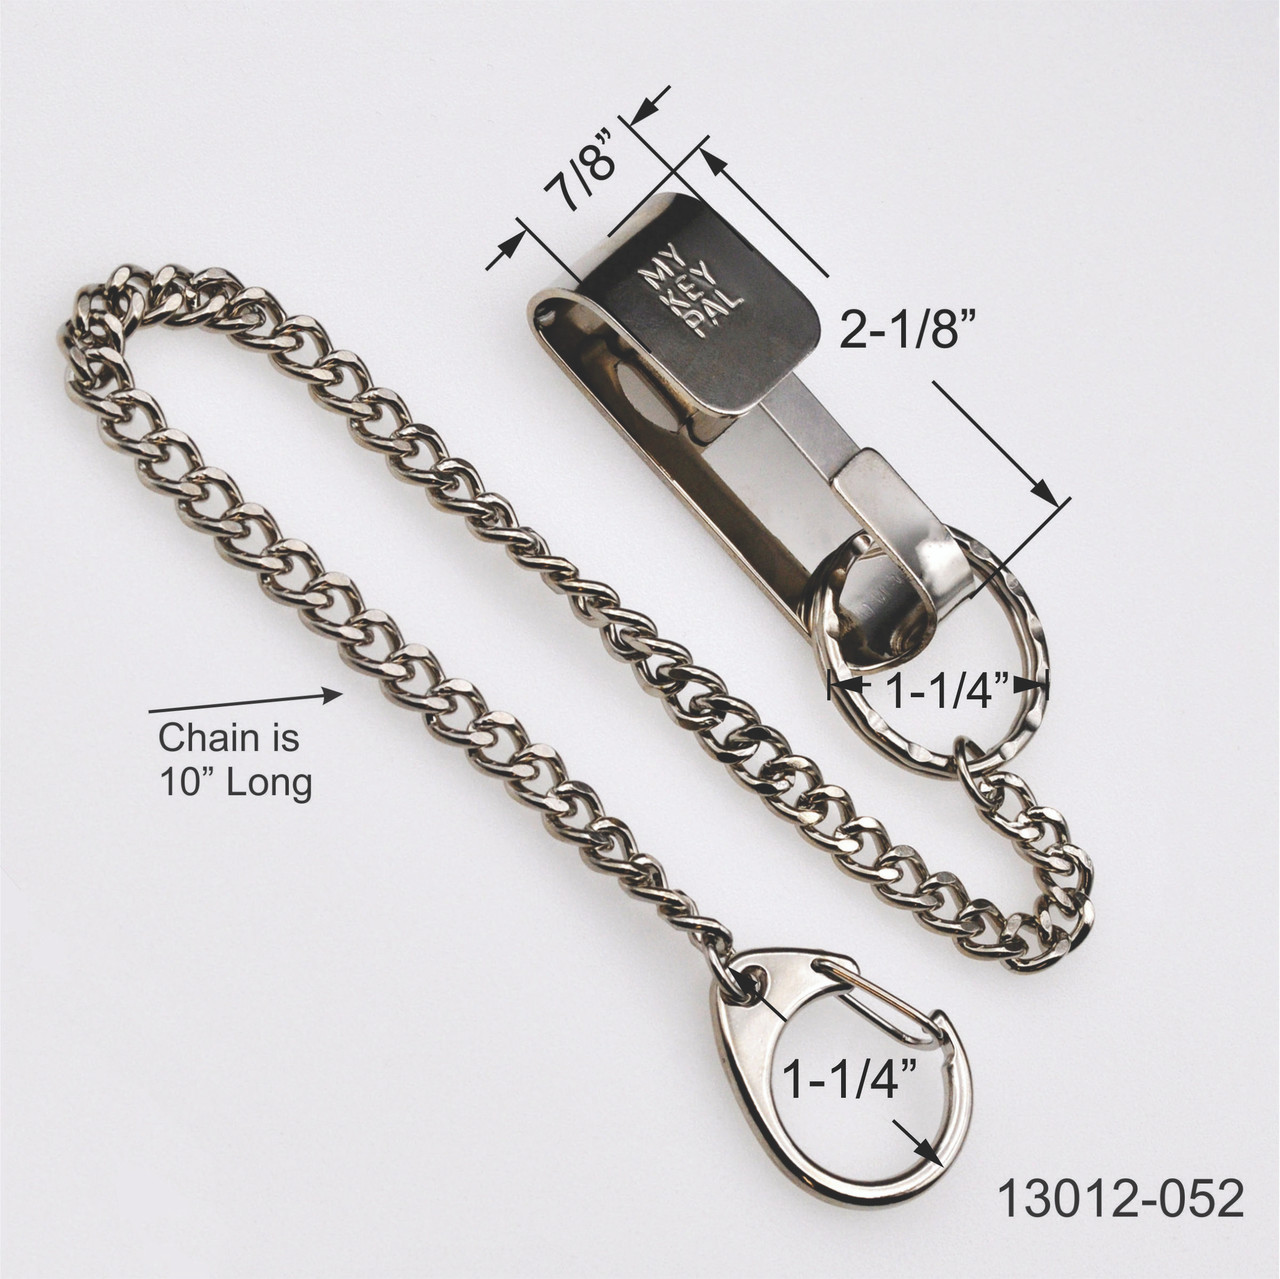 Shop for and Buy Belt Key Holder Metal Keychain with Removable Keyring and  Chain at . Large selection and bulk discounts available.